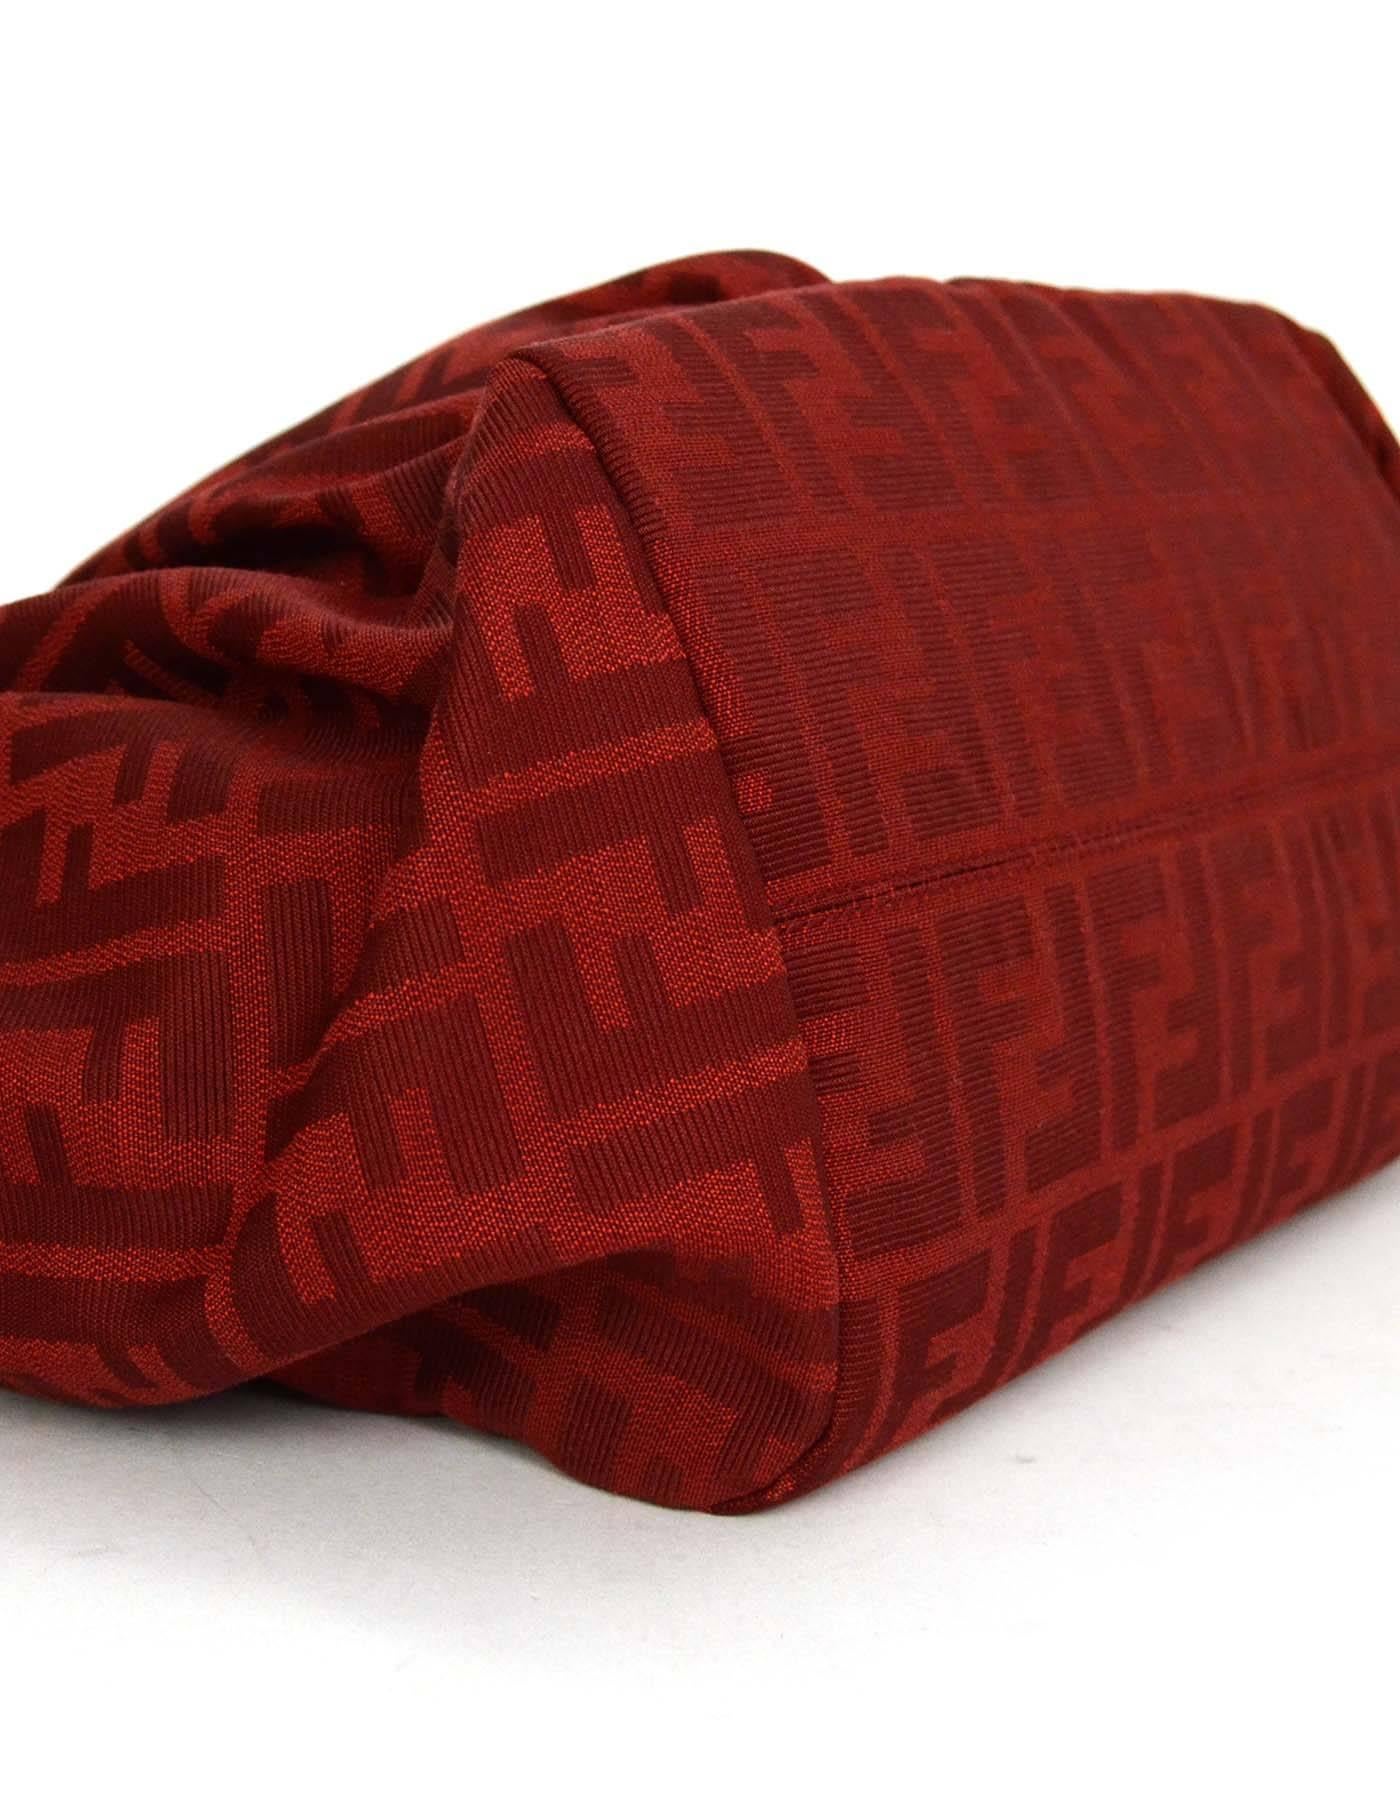 Women's Fendi Red Leather & Zucca Print Canvas Bag GHW